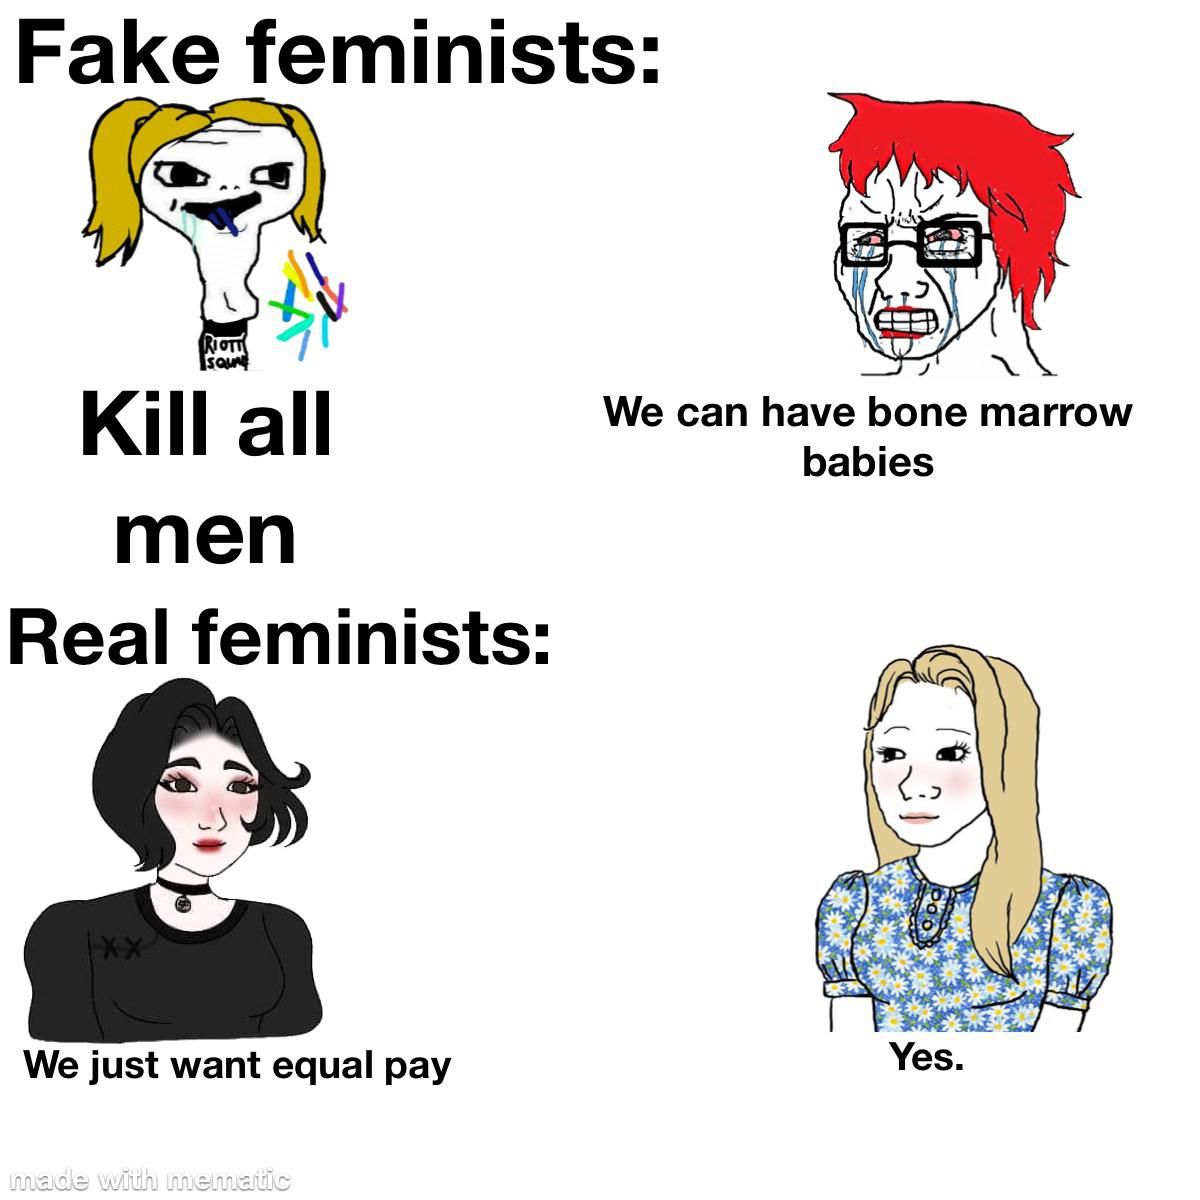 I see a lot of people hating on fake feminists acting like that’s what real feminists believe